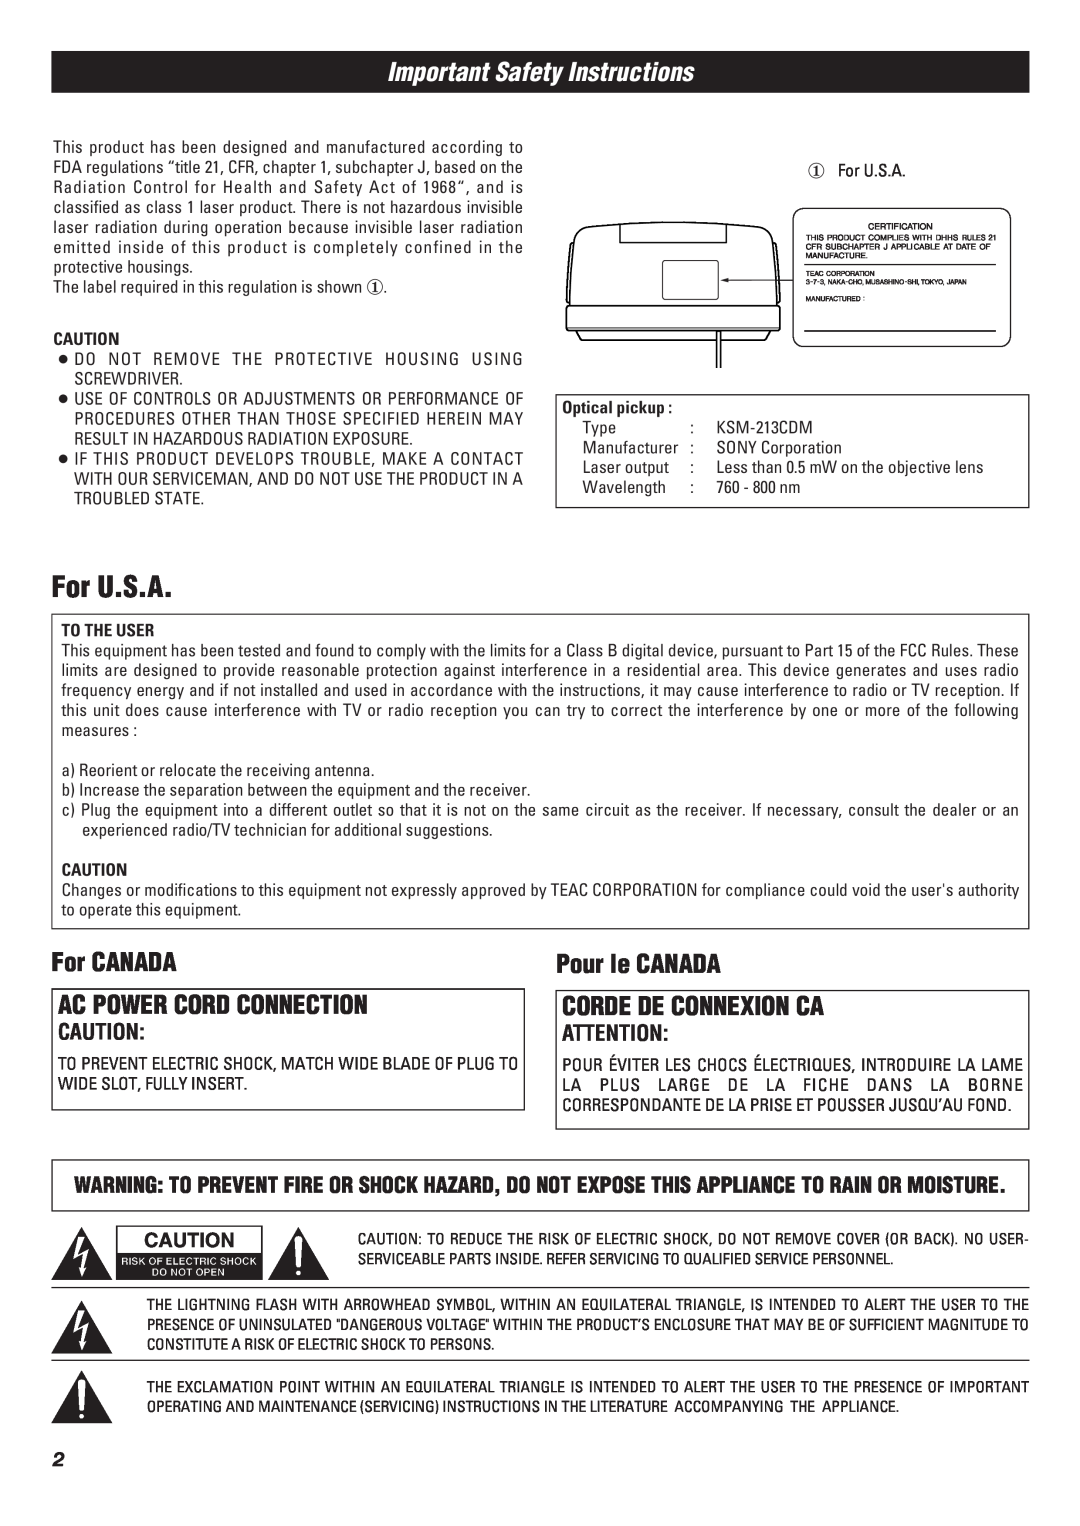 Teac SL-D90 owner manual For U.S.A, Important Safety Instructions, For CANADA AC POWER CORD CONNECTION 